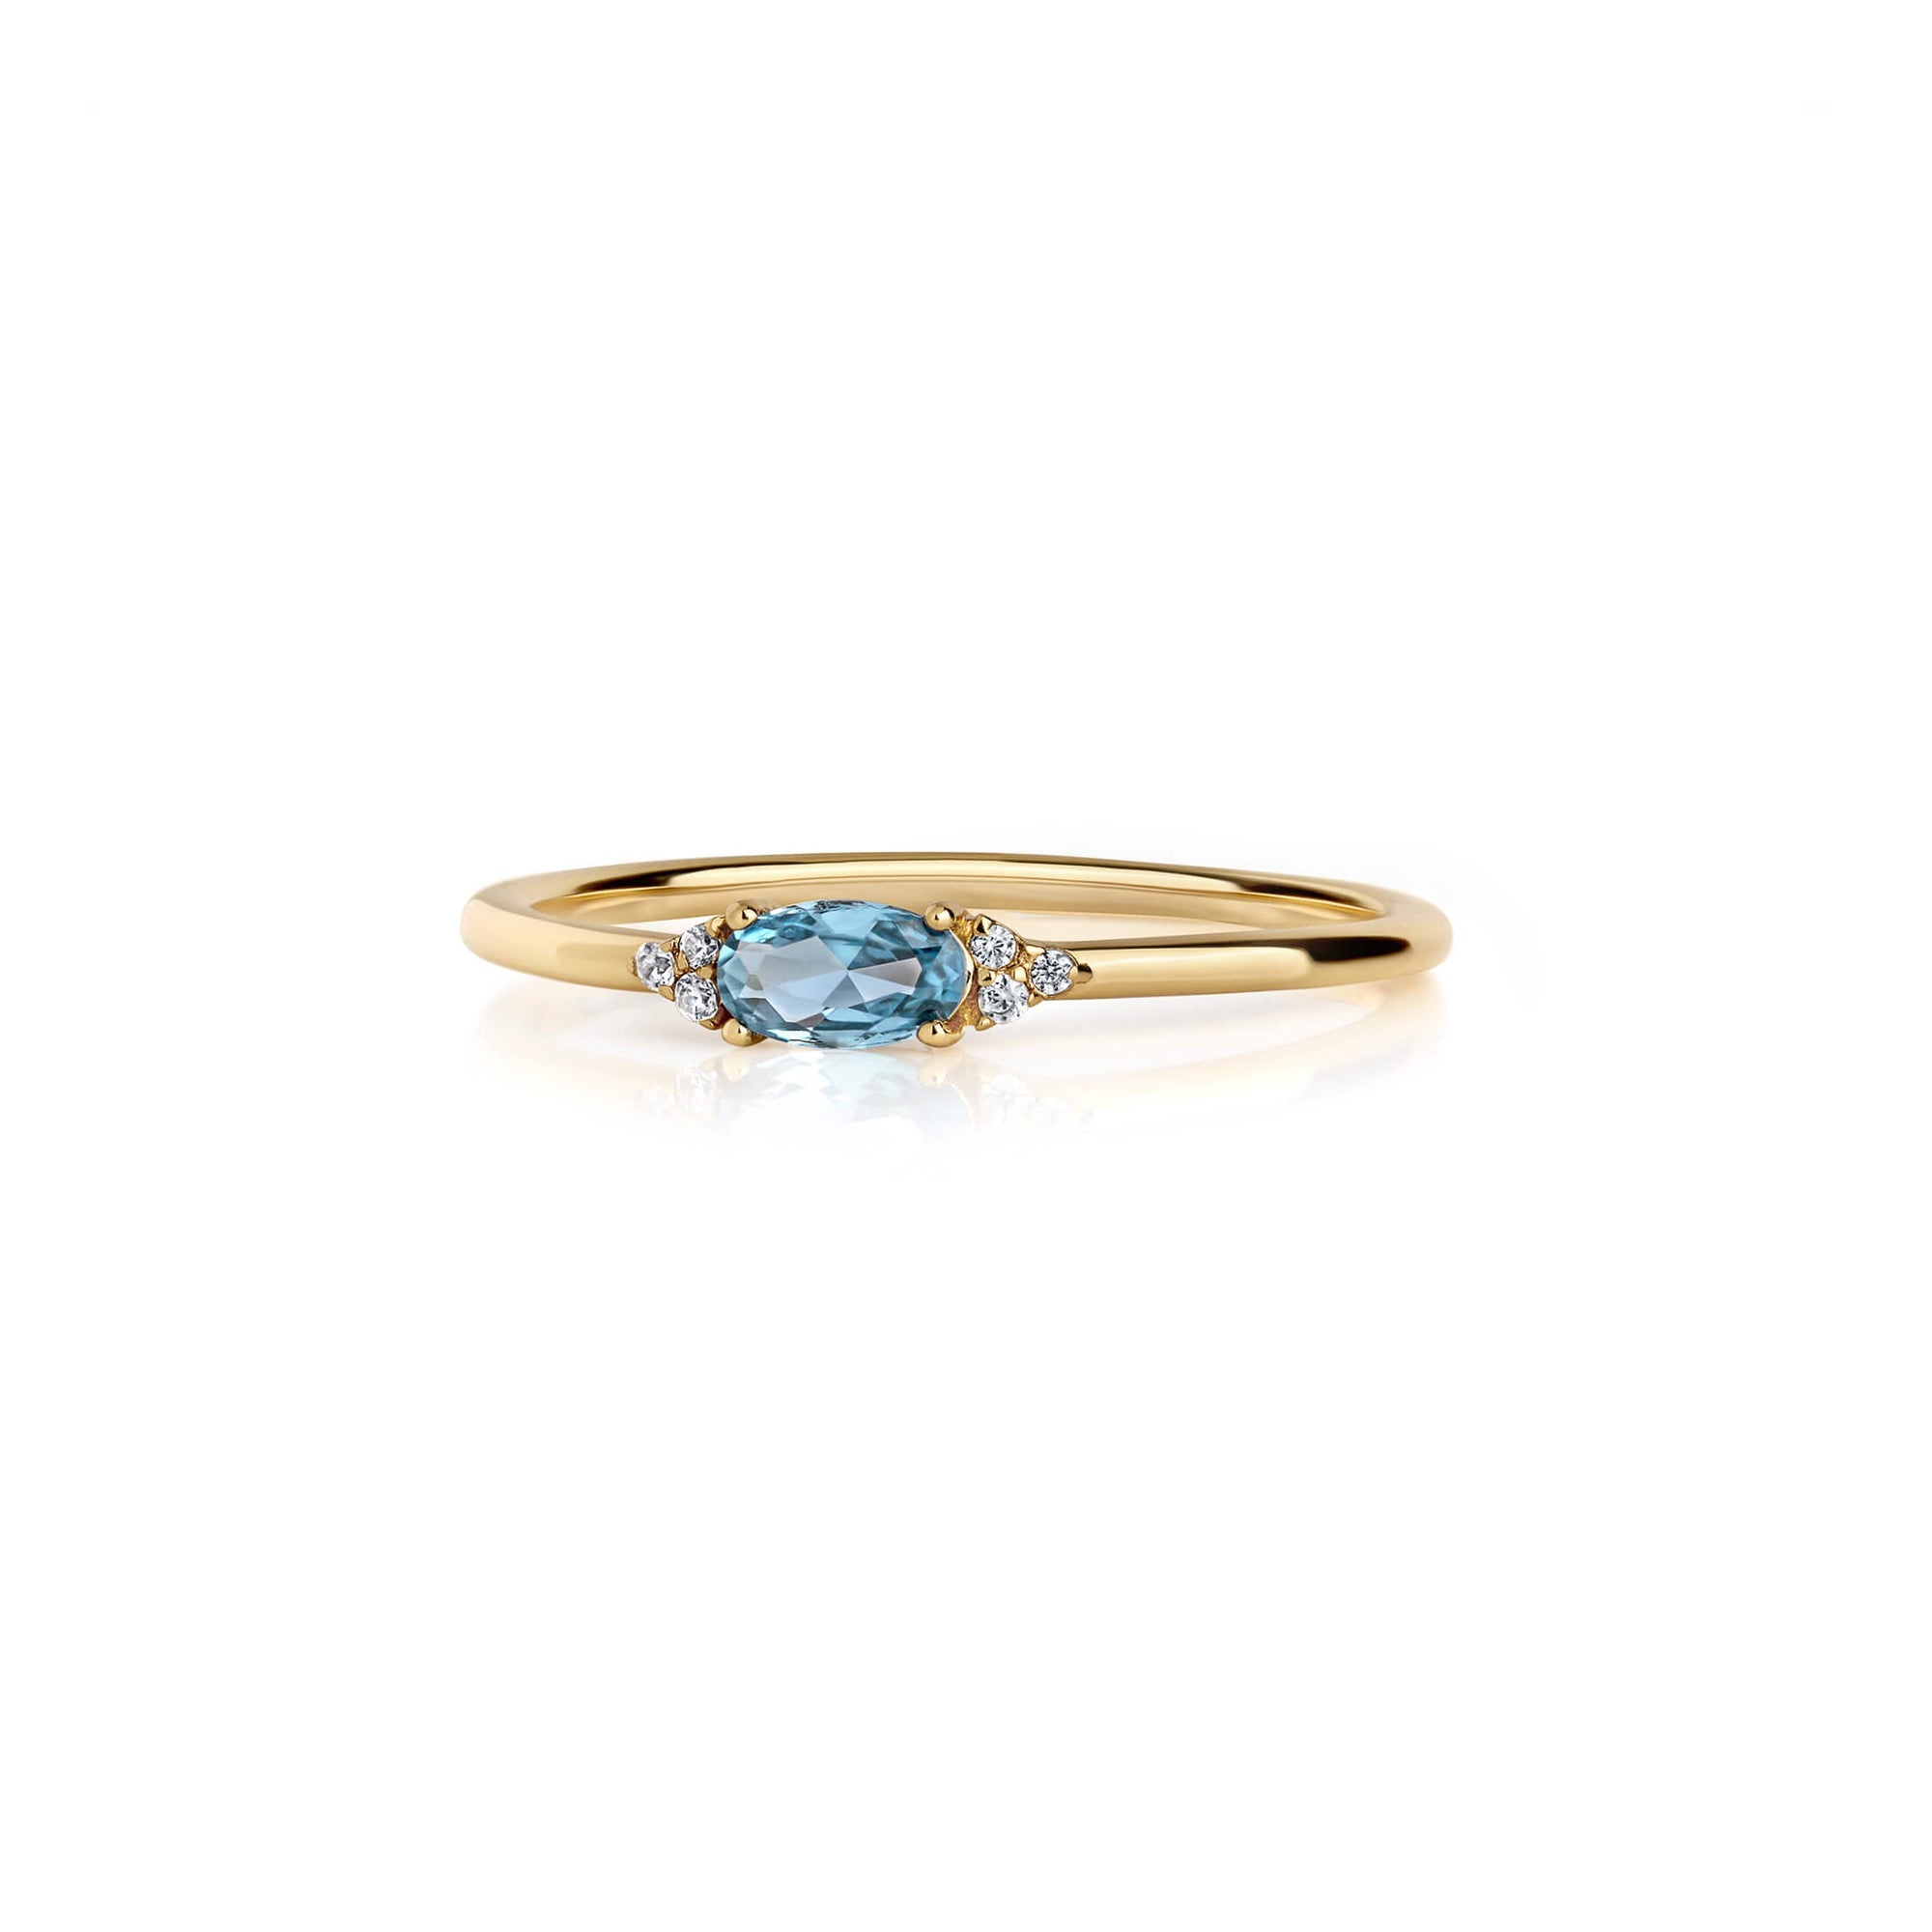 Everly Ring - Trove & Co.